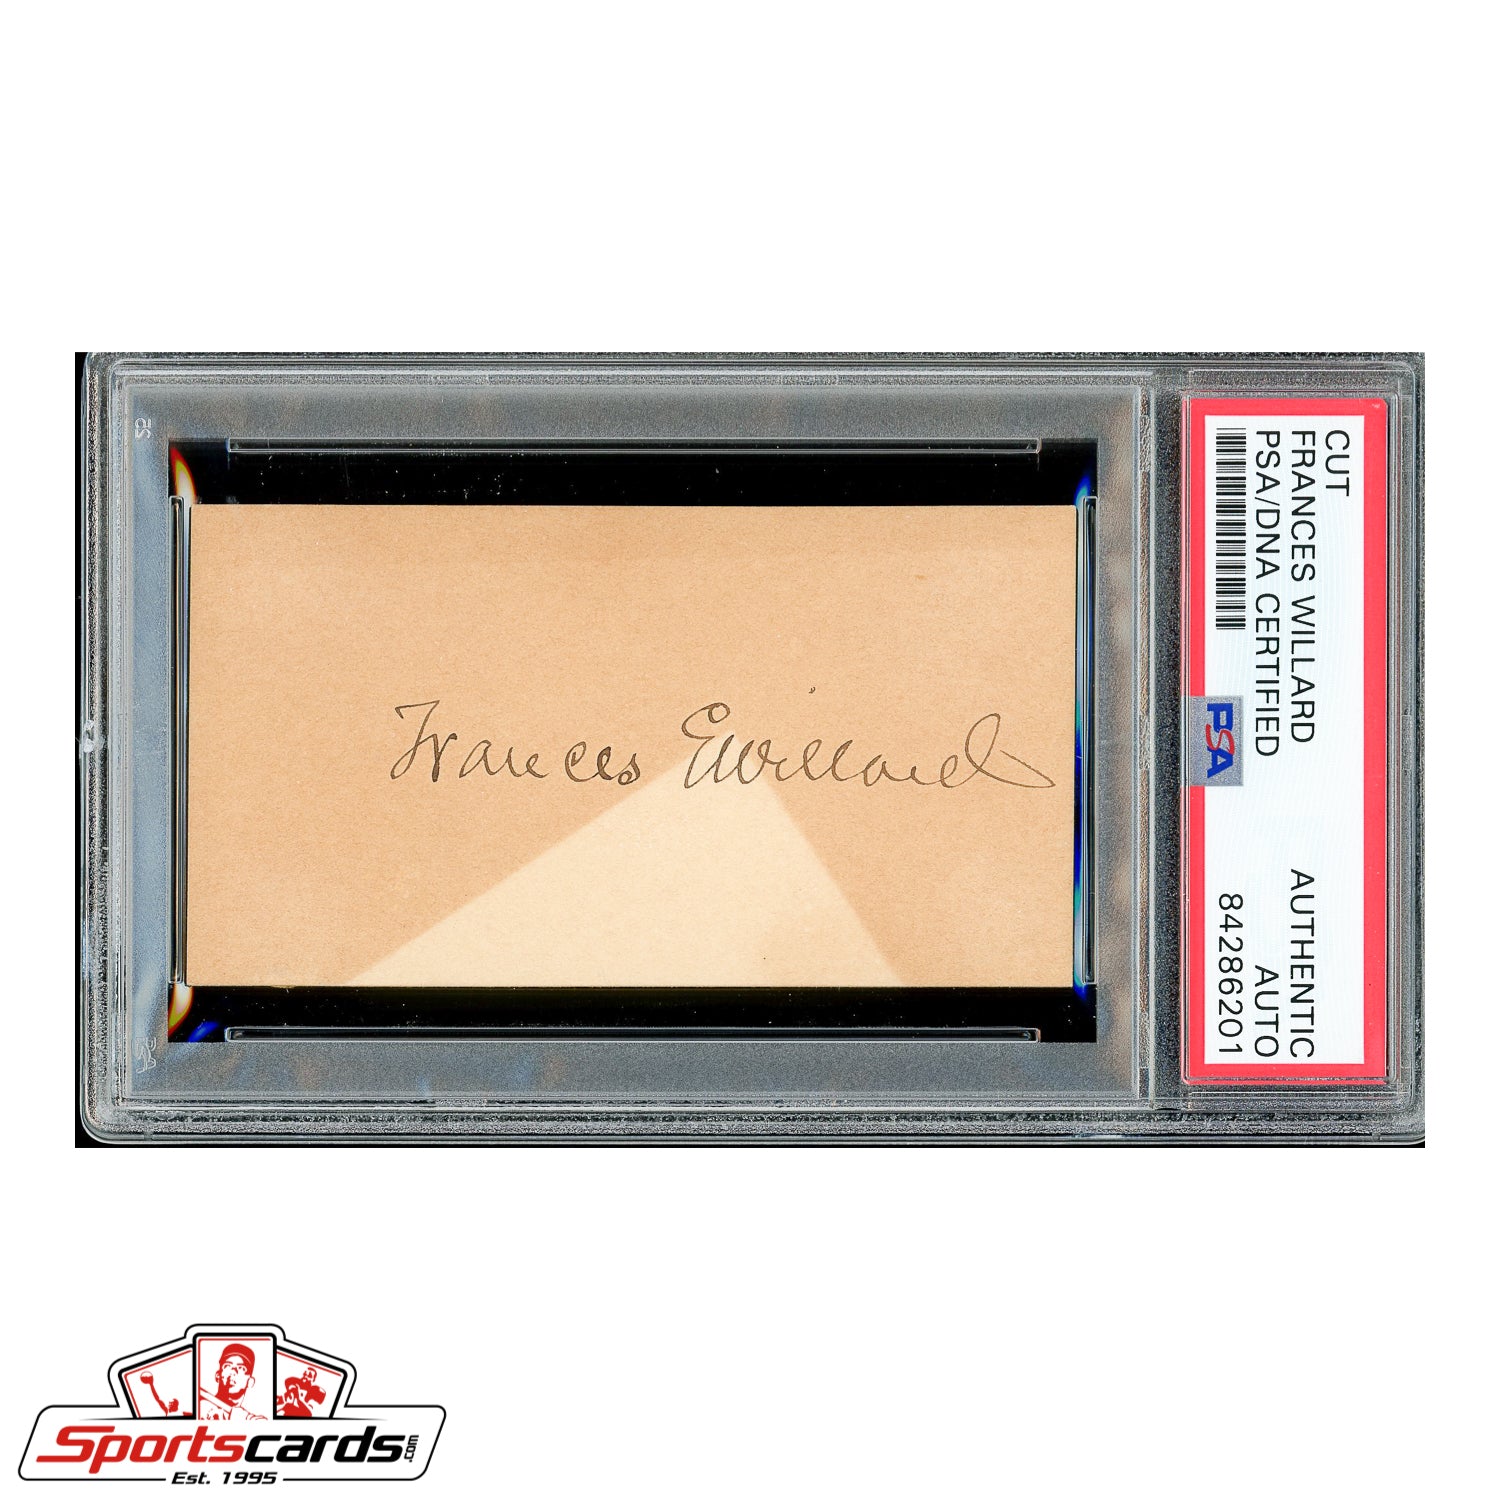 Women's Rights Pioneer Frances Willard Signed Autographed Card - PSA/DNA